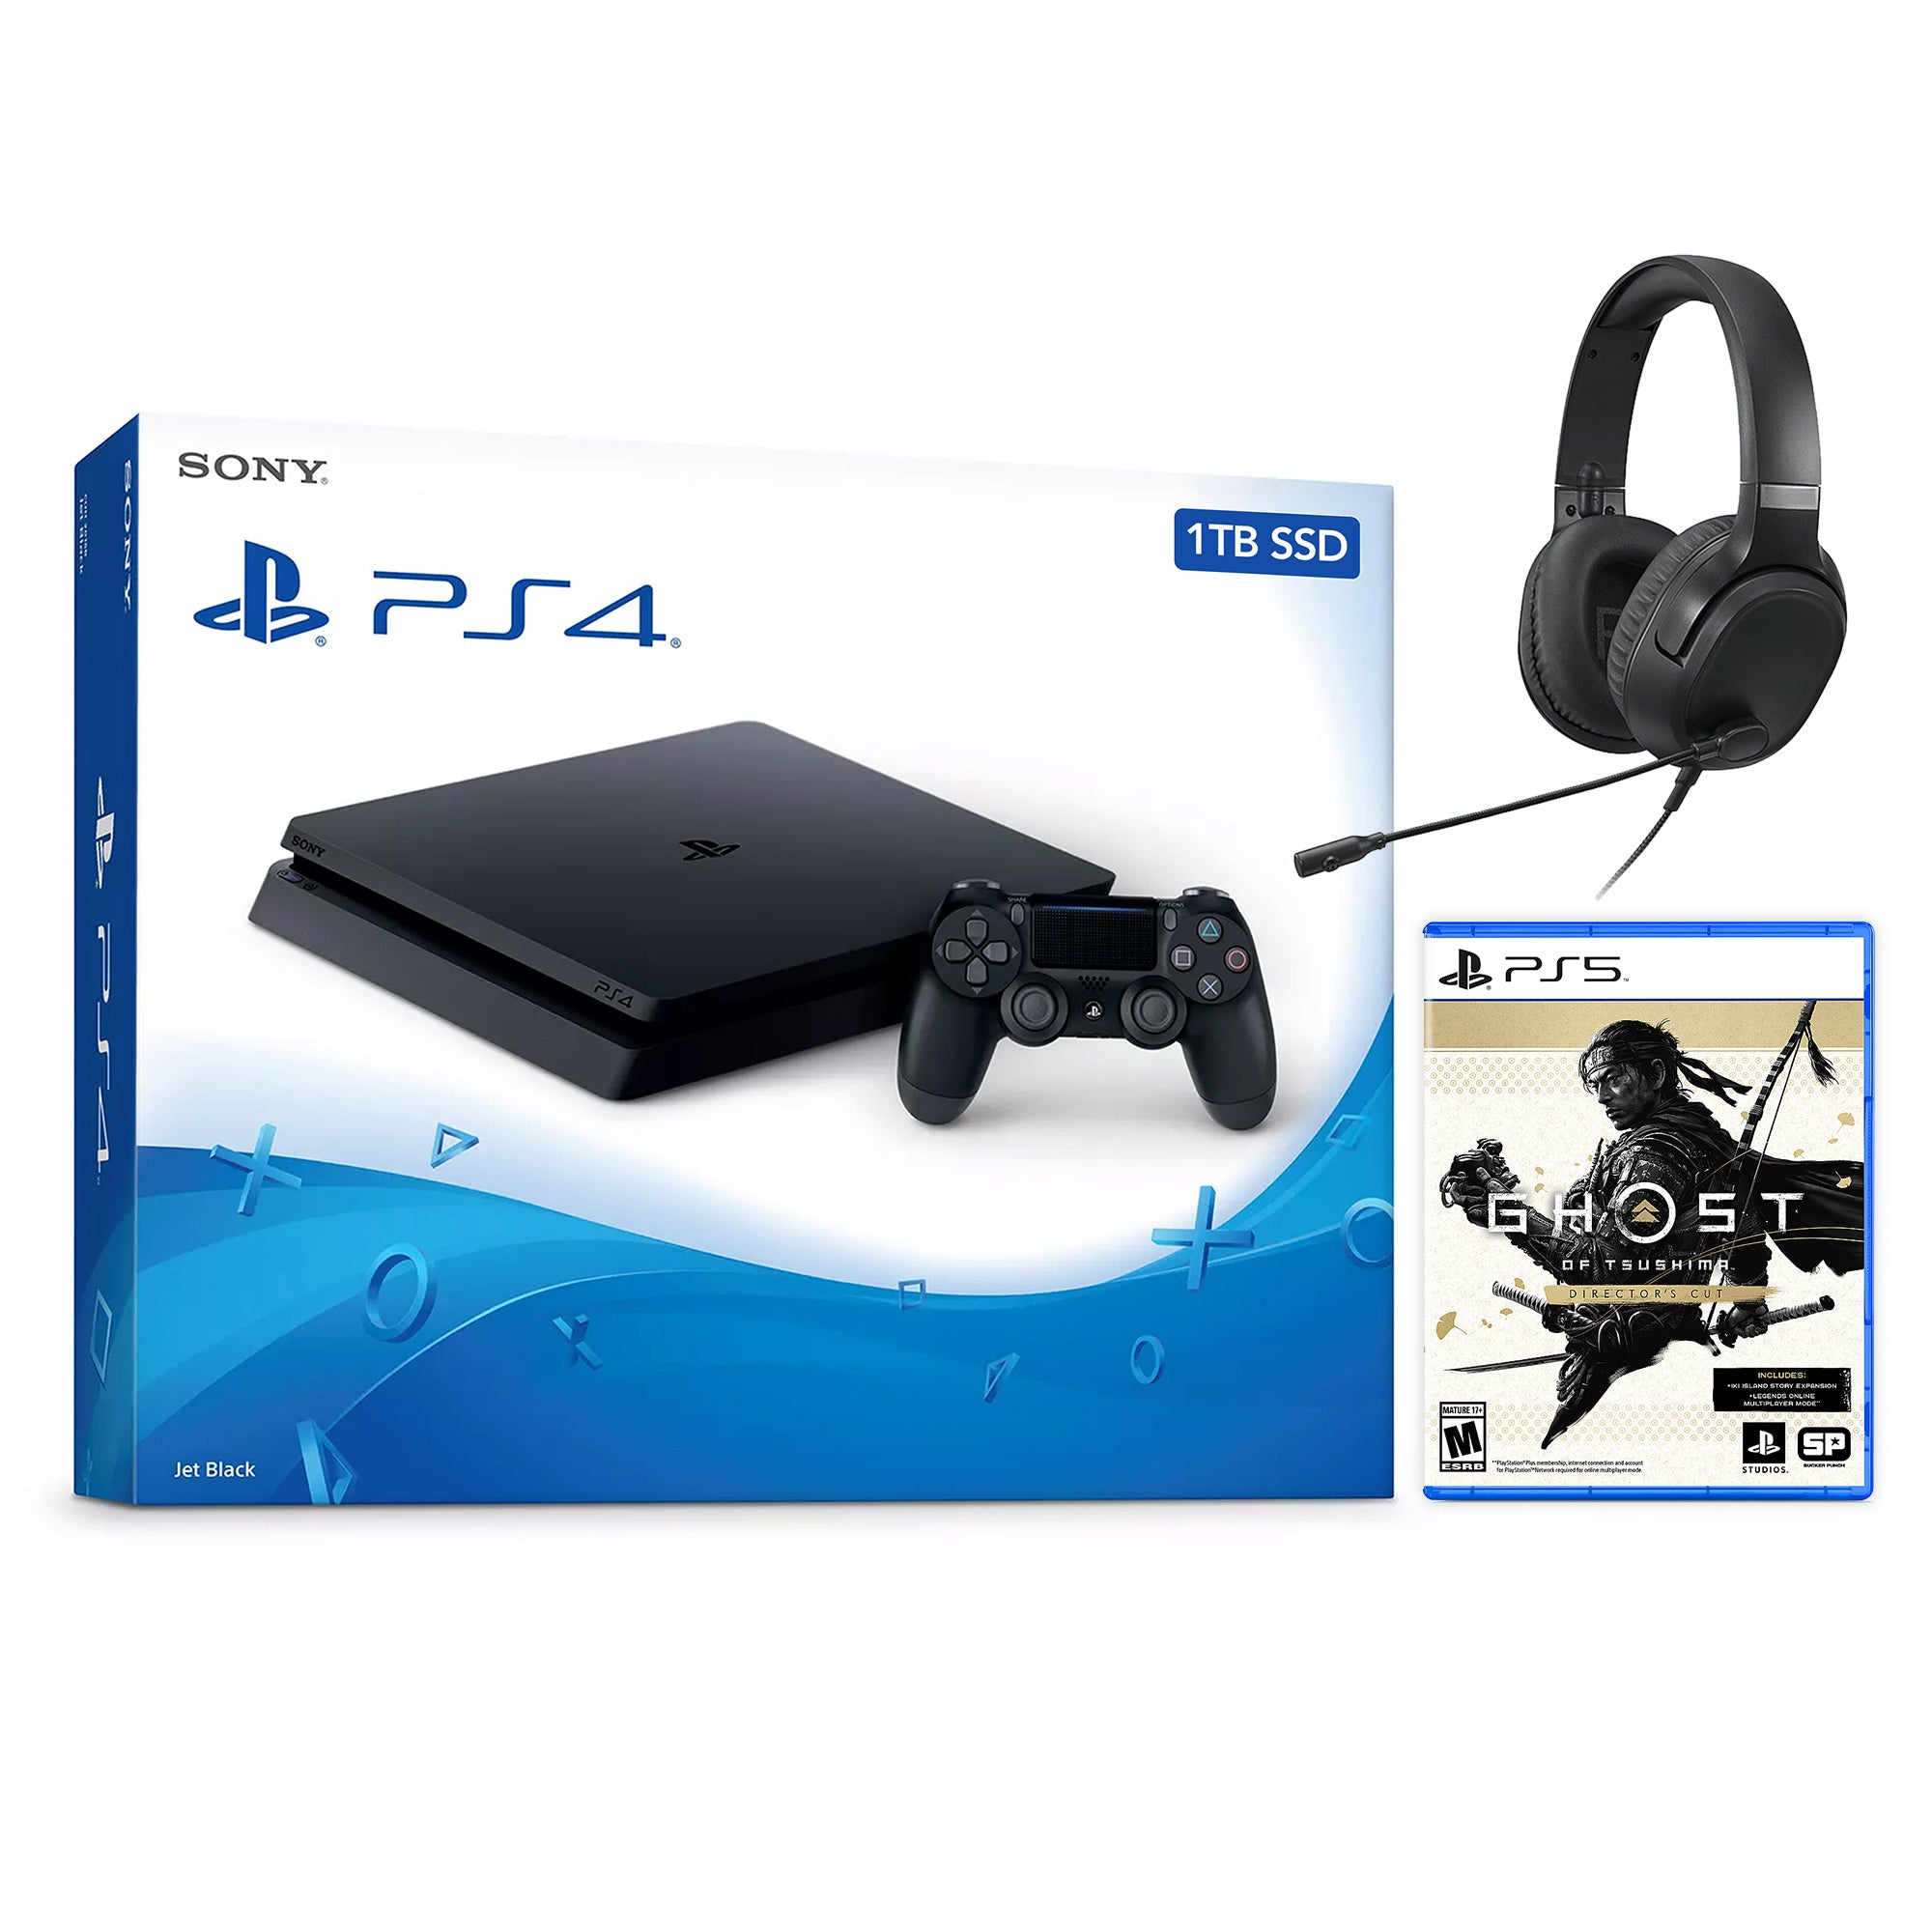 Sony PlayStation 4 Slim God of War PlayStation Hits Bundle Upgrade 1TB SSD PS4 Gaming Console, Jet Black, with Mytrix Chat Headset - Internal Fast Solid State Drive Enhanced PS4 Console